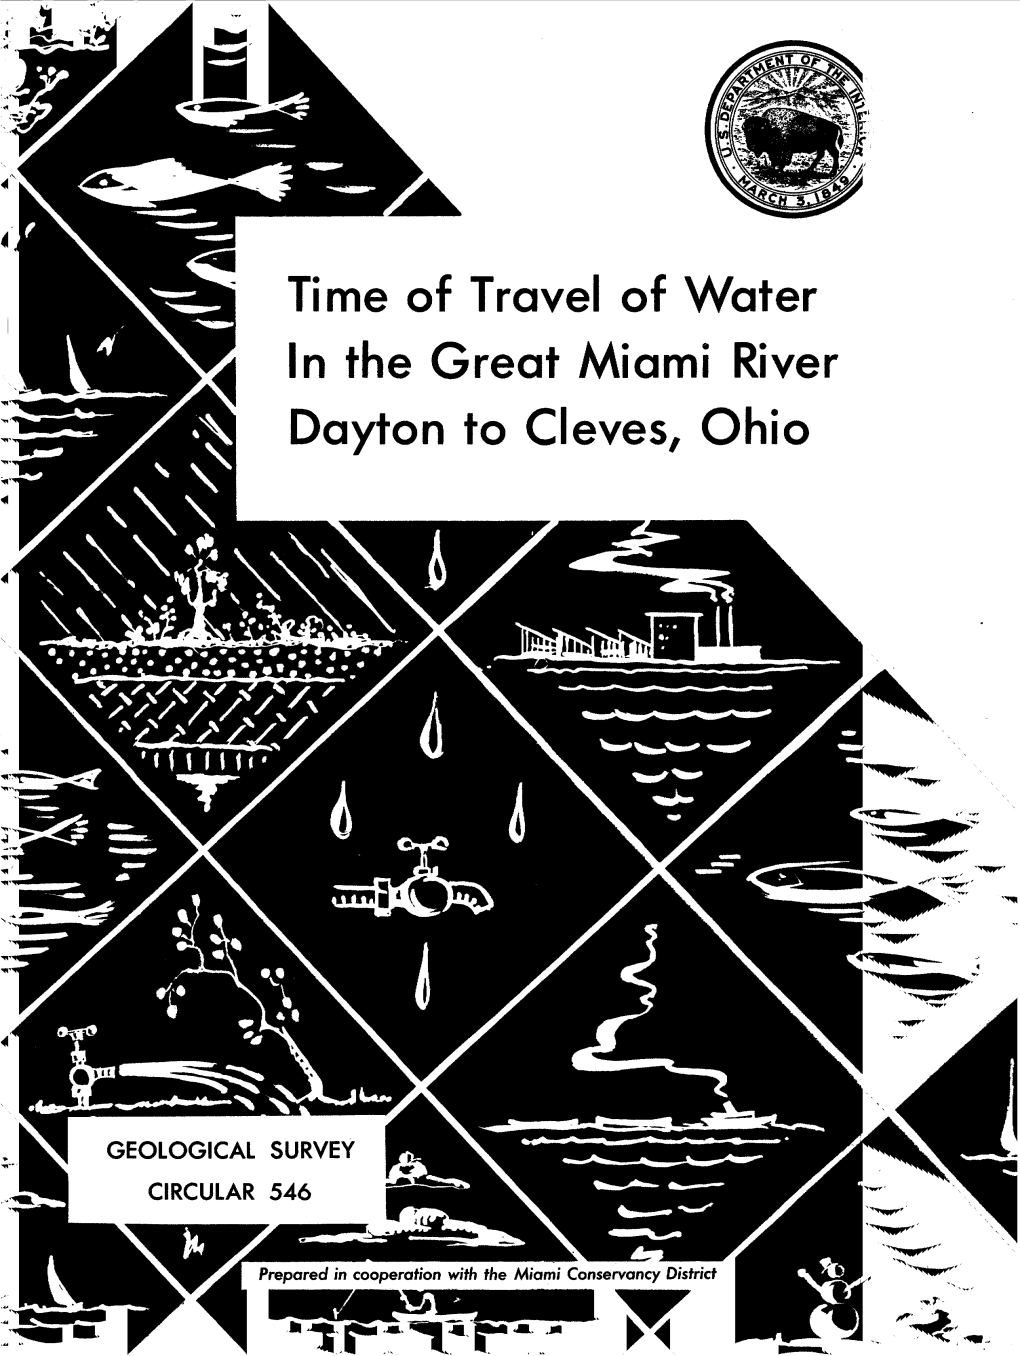 Time of Travel of Water in the Great Miami River Dayton to Cleves, Ohio